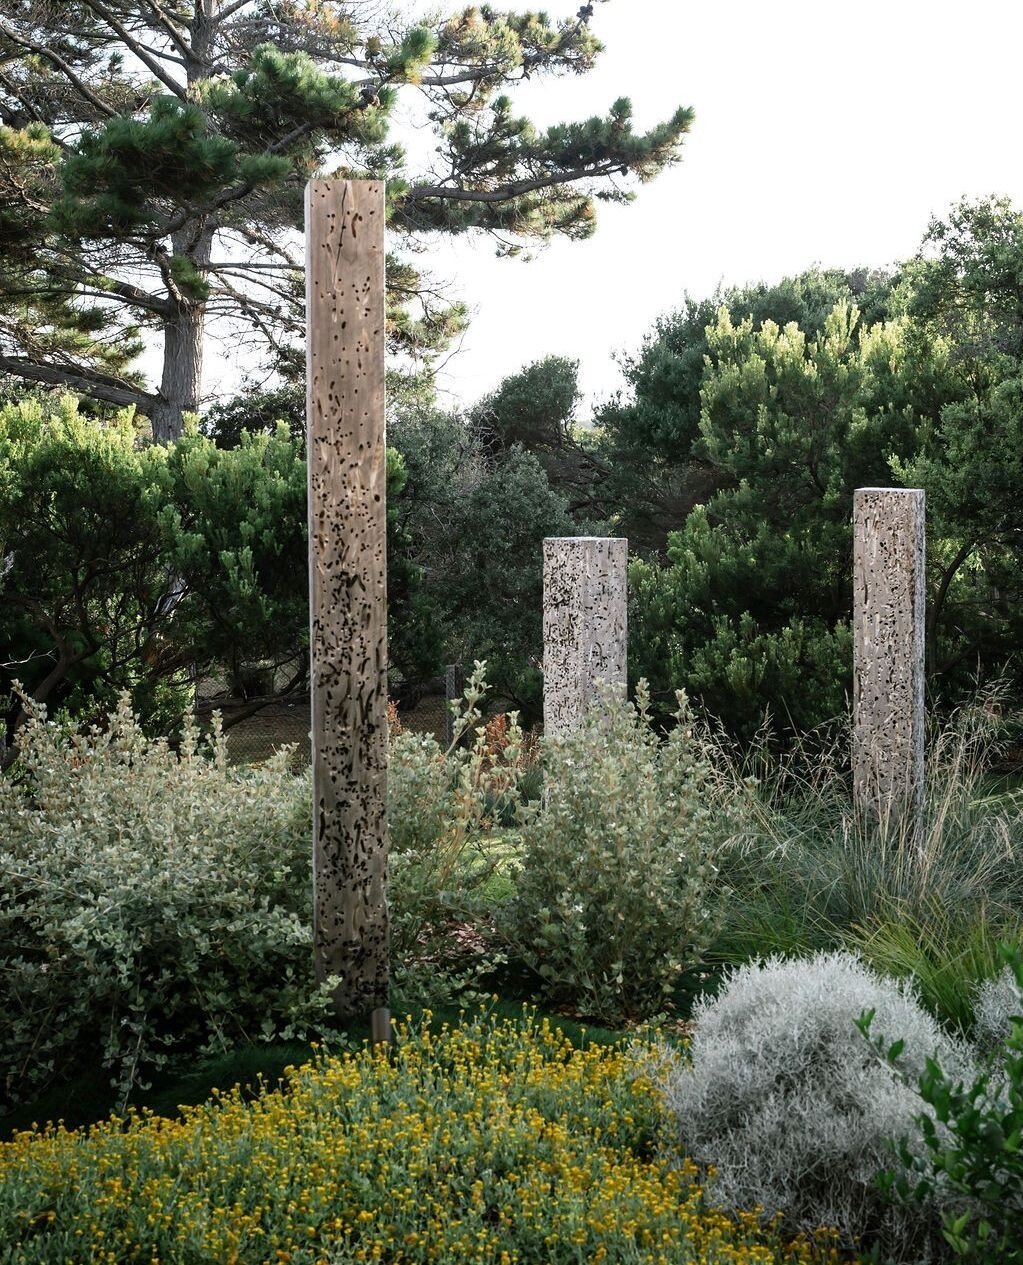 Thoughtful planting beautifully complements the totem pole detail in this garden design by @juliecrowedesign. ⁠
⁠
📸 @janisalwayshashercamera⁠